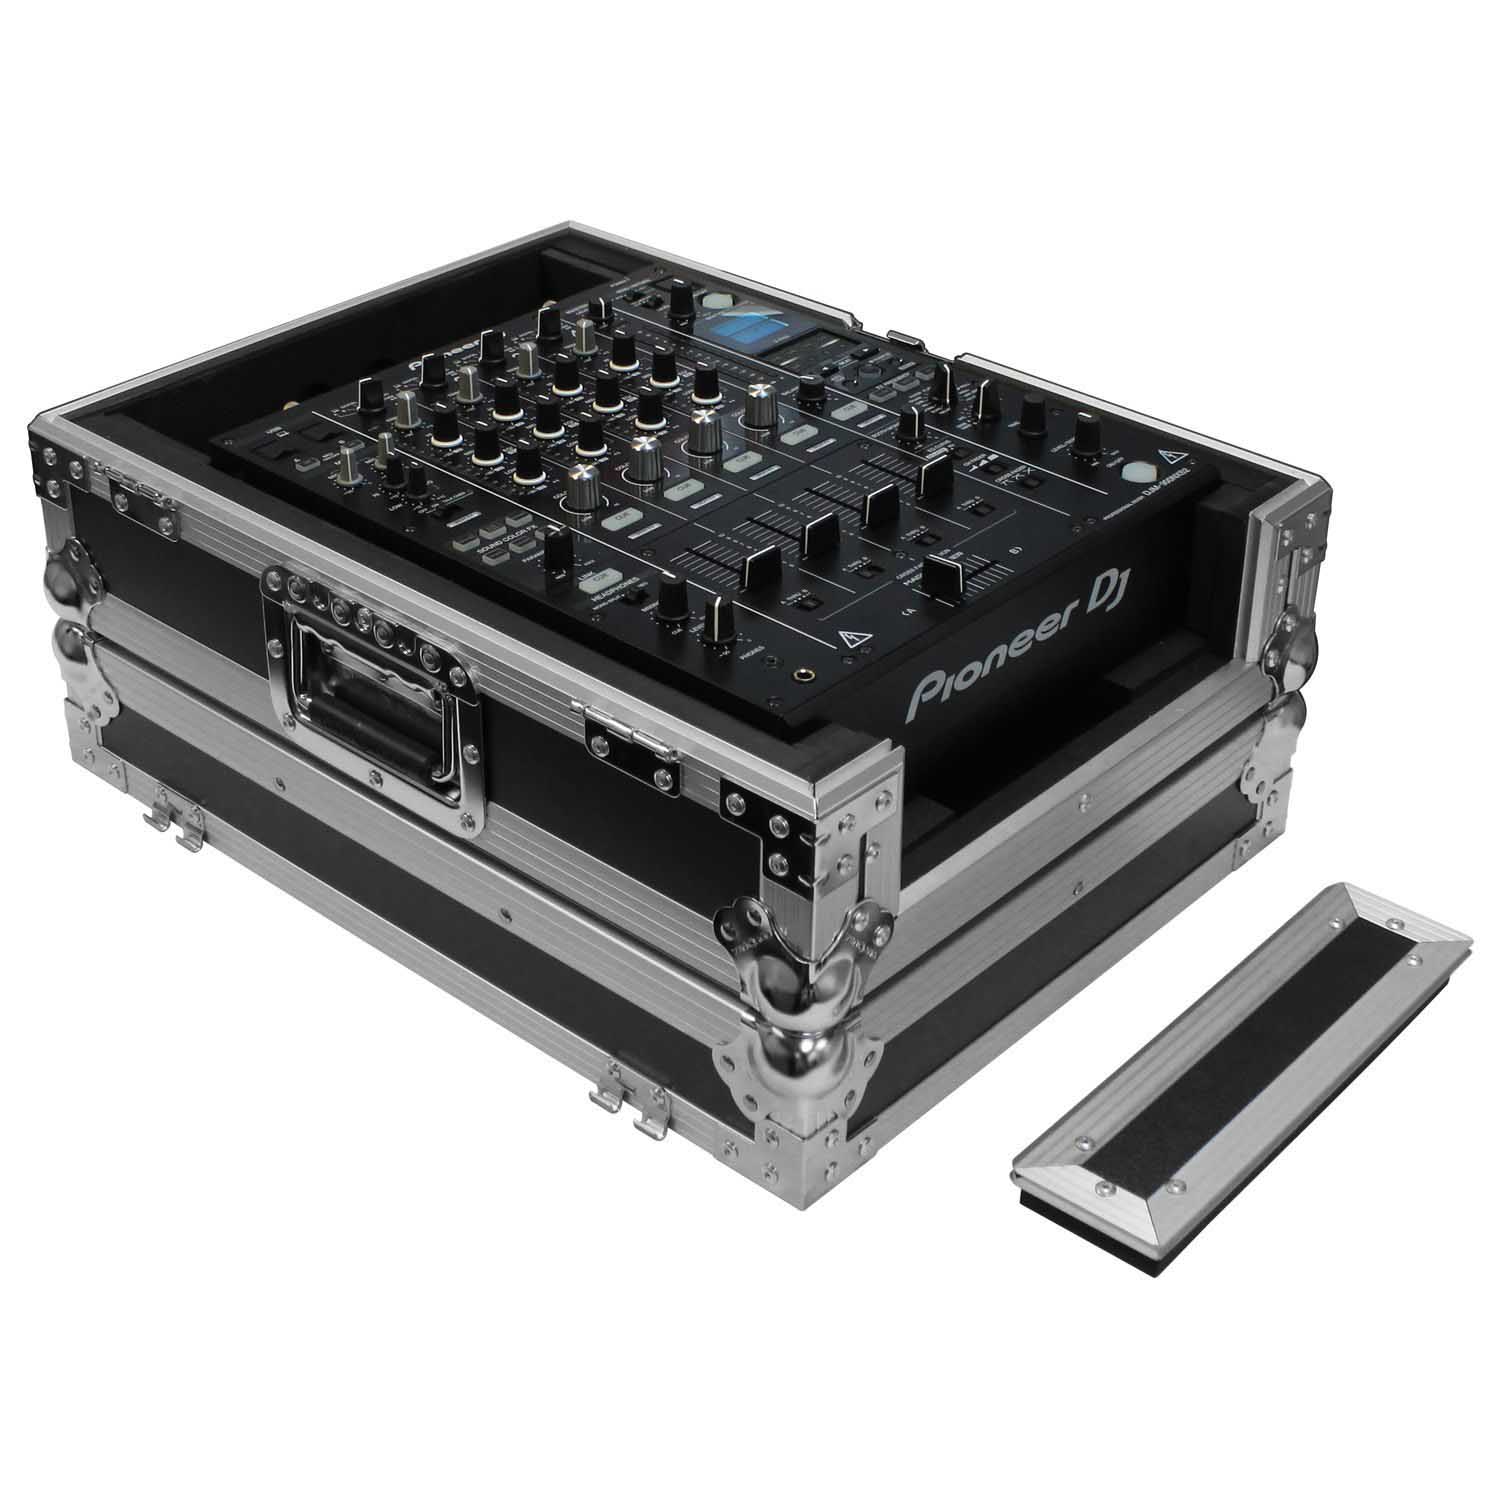 Odyssey FZ12MIXXD Universal 12″ Format DJ Mixer Flight Case with Extra Deep Rear Cable Compartment Odyssey